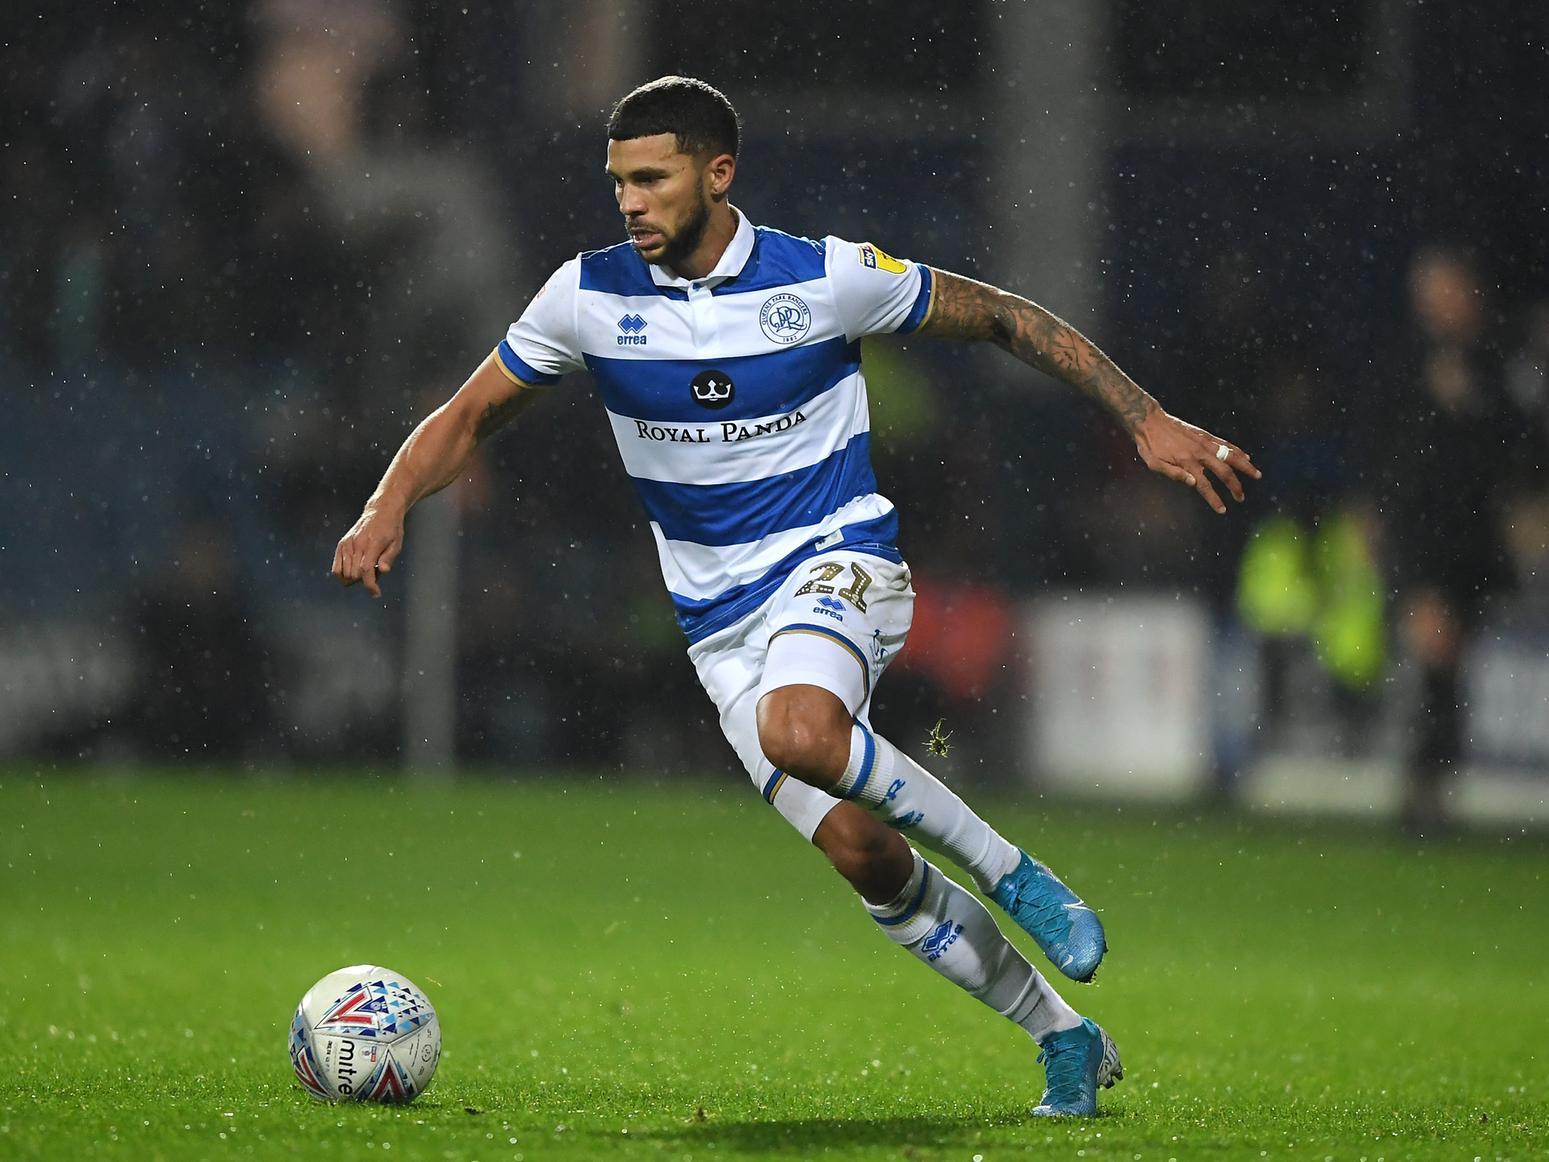 Wells has actually already been recalled by Burnley, so Rangers will have to buy him outright if they want him back at Loftus Road. Other clubs such as Nottingham Forest and Bristol City have been linked, and there are also rumours that Burnley are keen to keep hold of him.